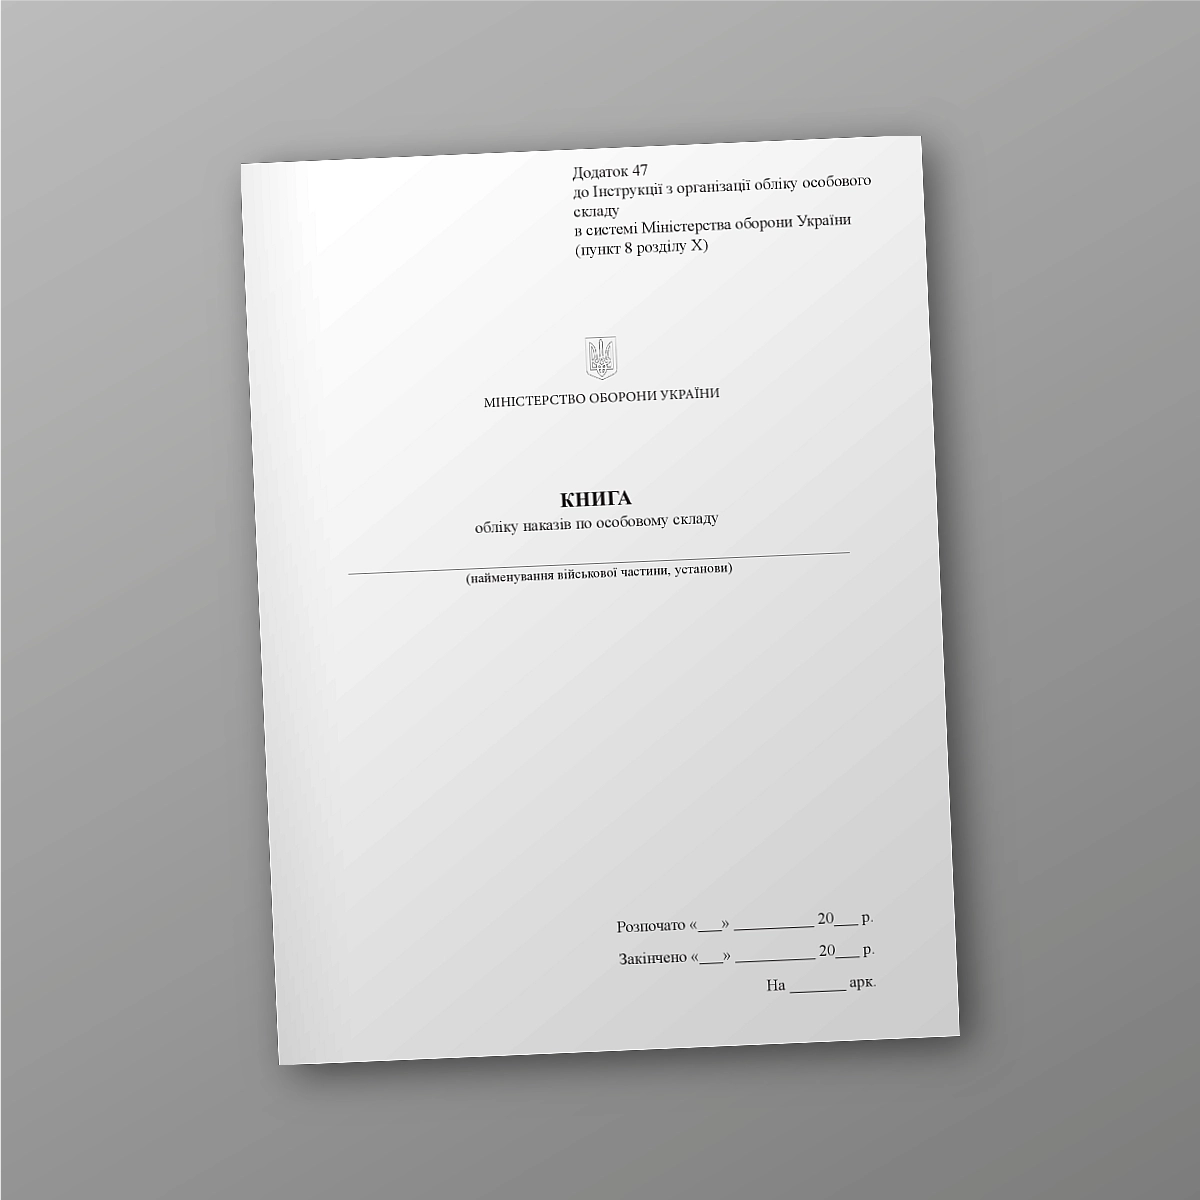 Book of accounting for personnel orders | PrintTo: